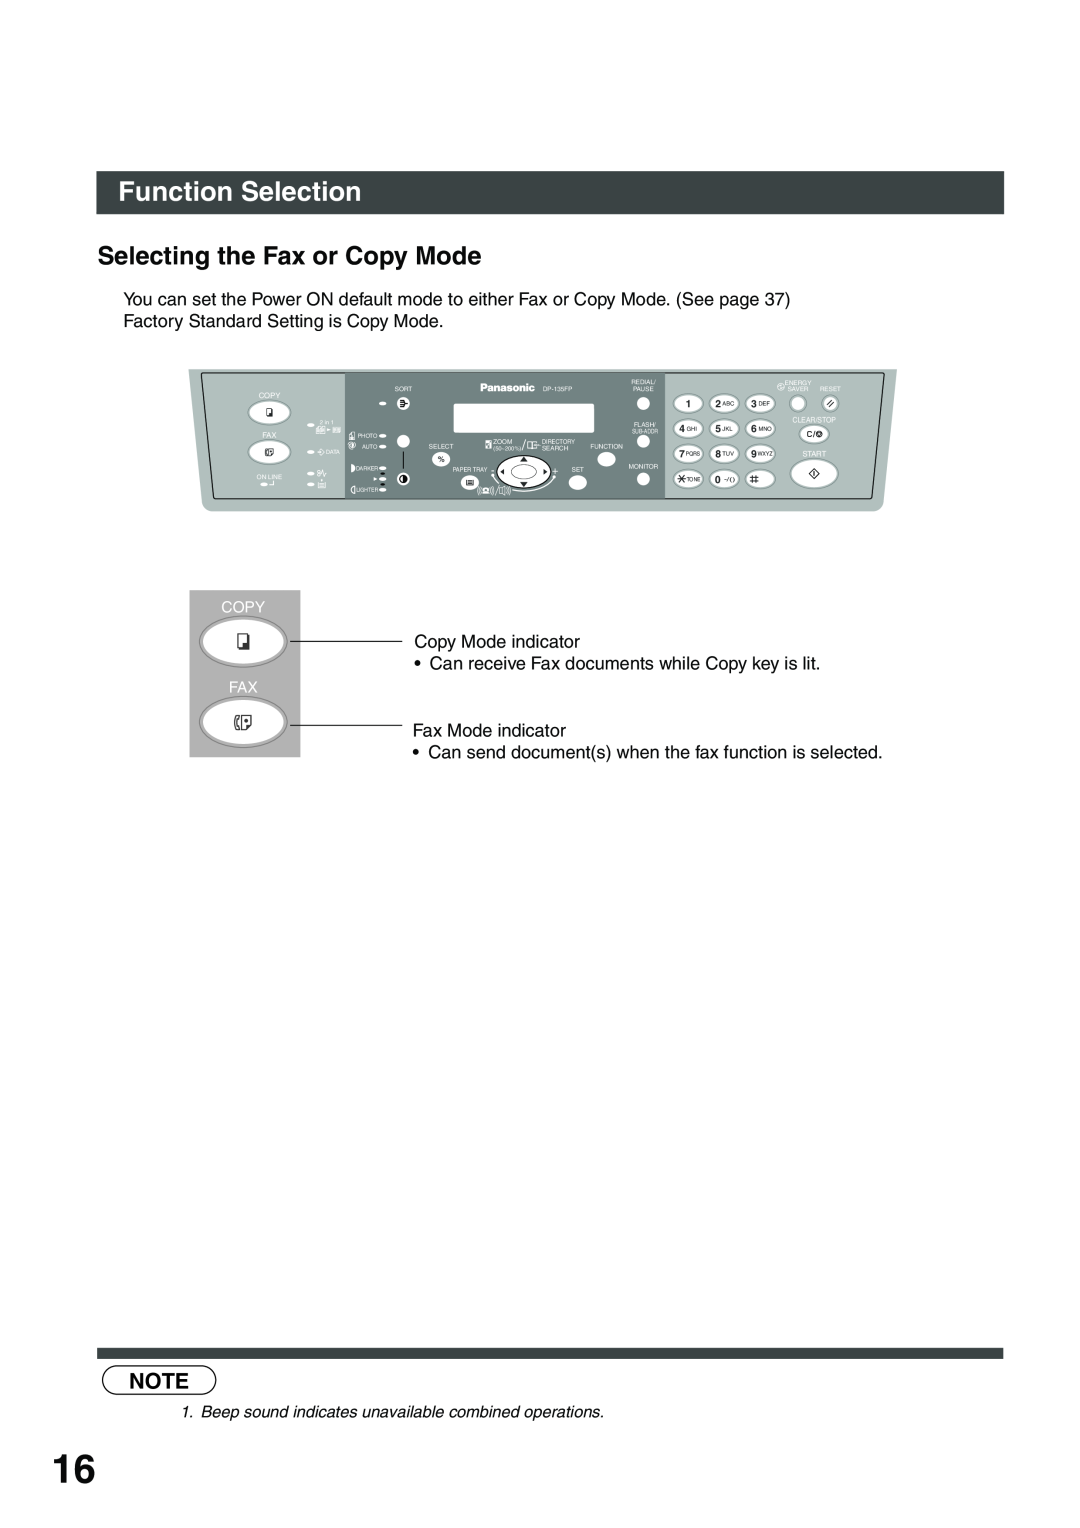 Panasonic DP-135FP appendix Function Selection, Selecting the Fax or Copy Mode 